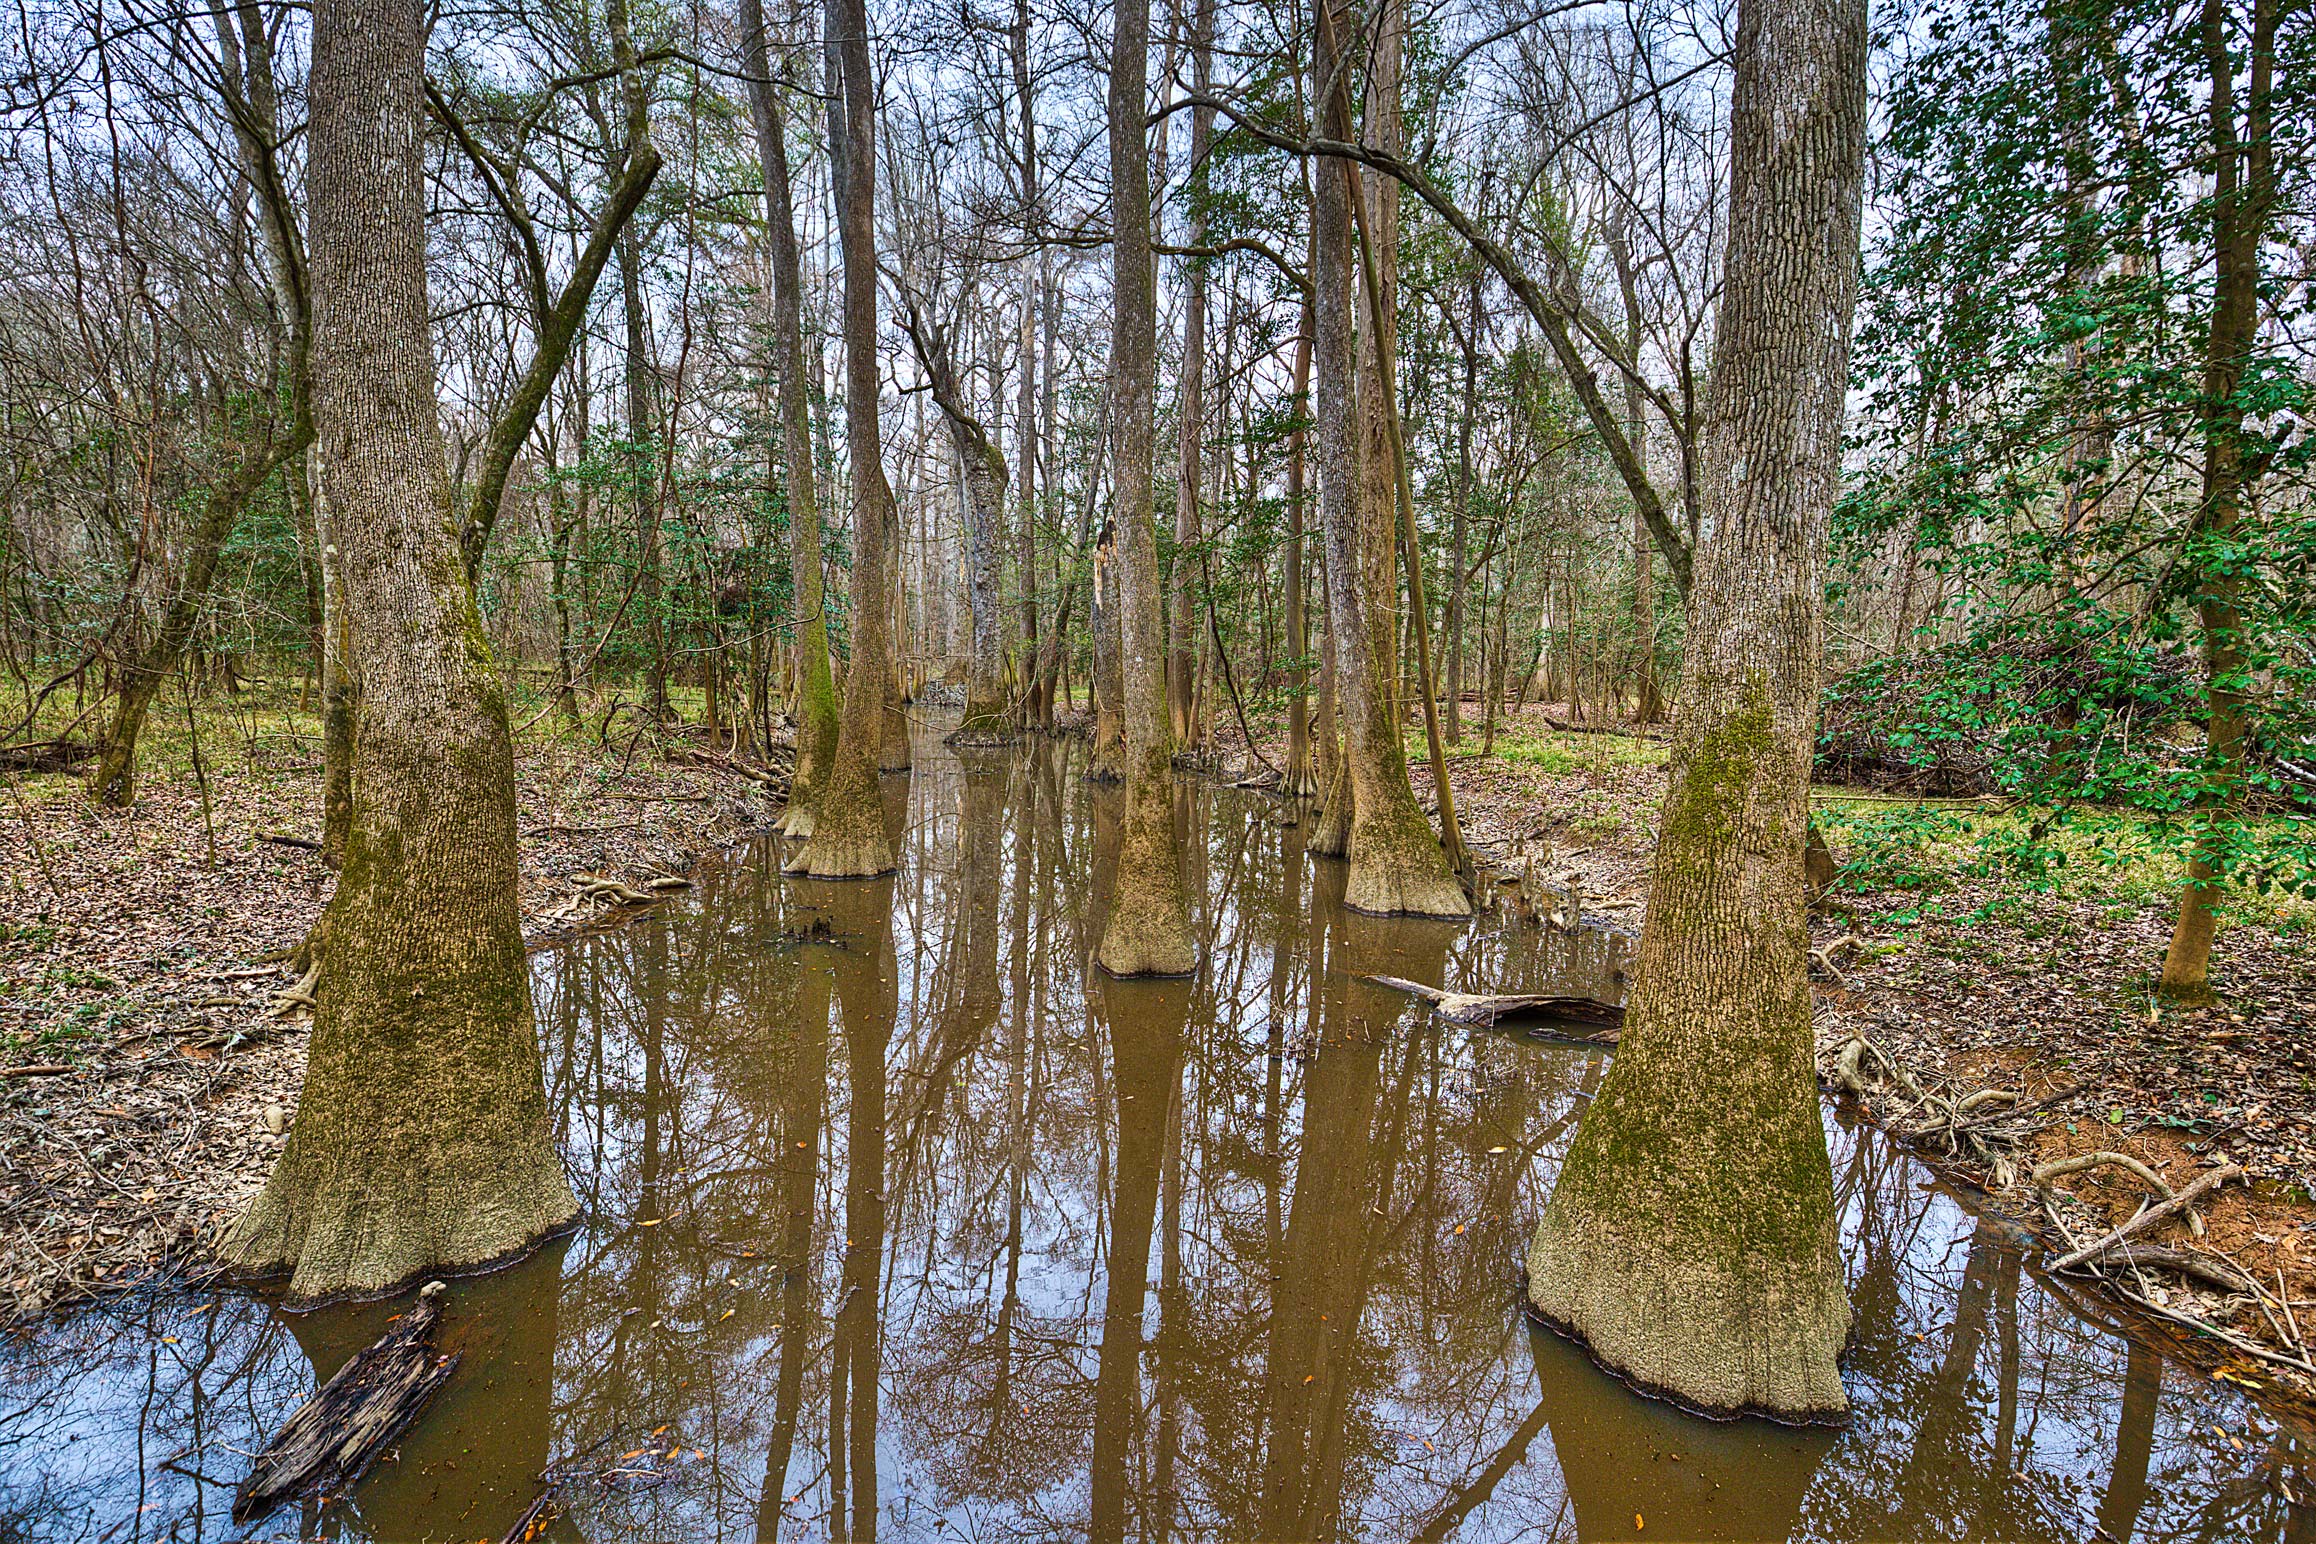 The Floodplains of Congaree